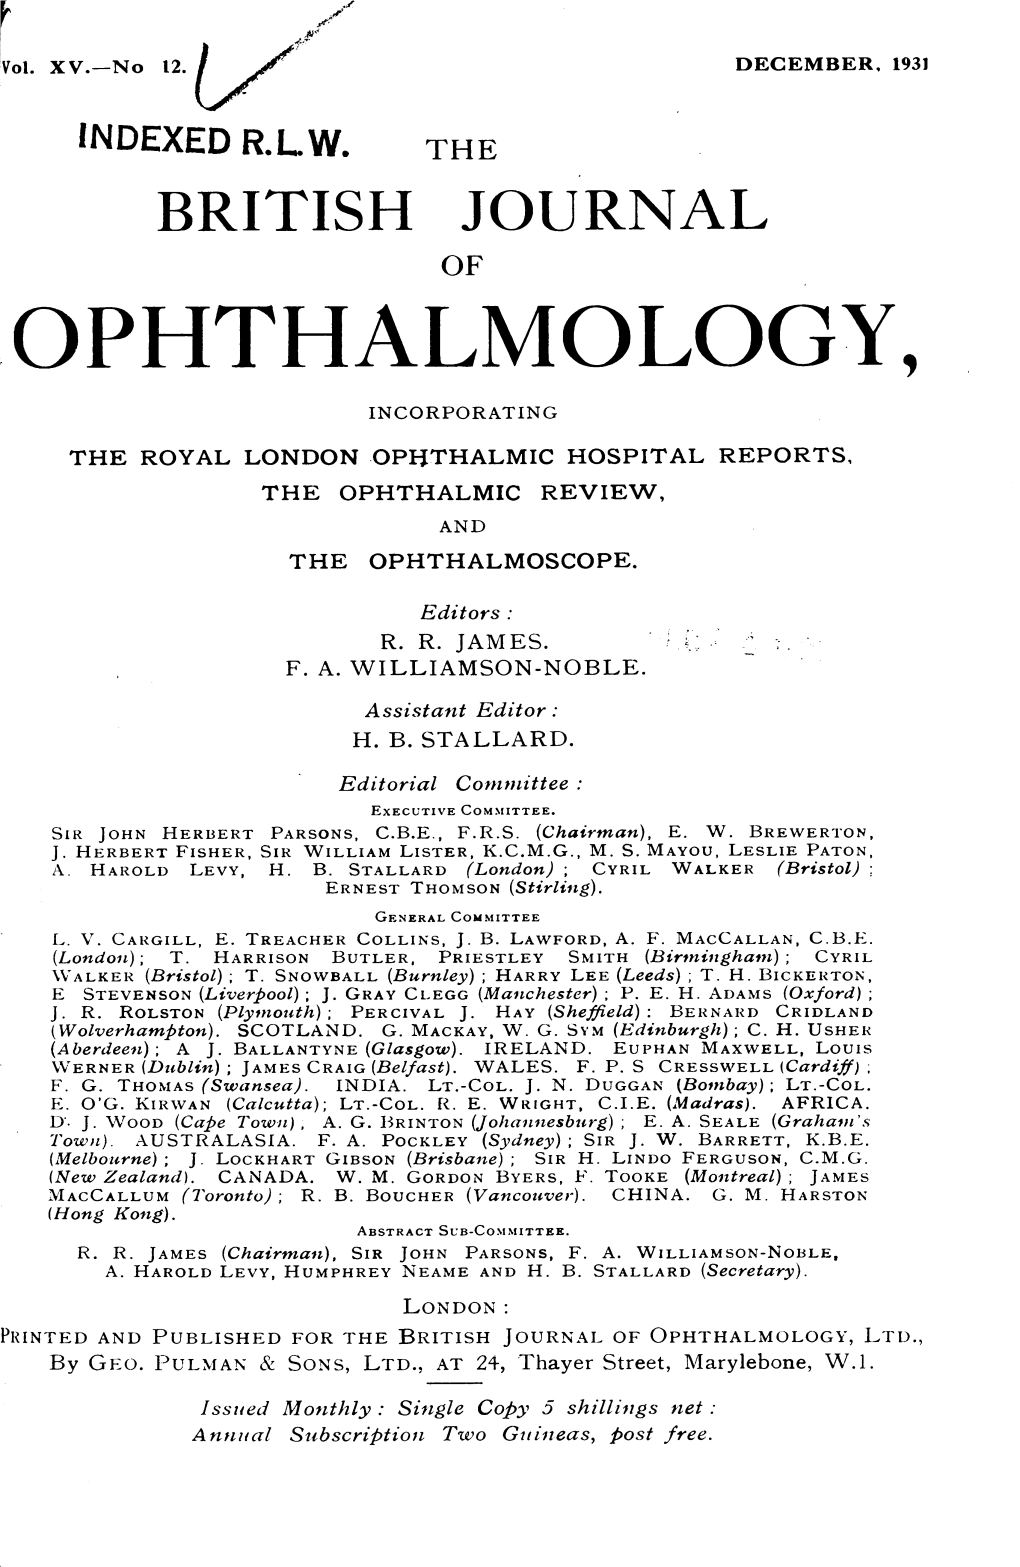 Rophthalmology,OF INCORPORATING the ROYAL LONDON OPIHTHALMIC HOSPITAL REPORTS, the OPHTHALMIC REVIEW, and the OPHTHALMOSCOPE